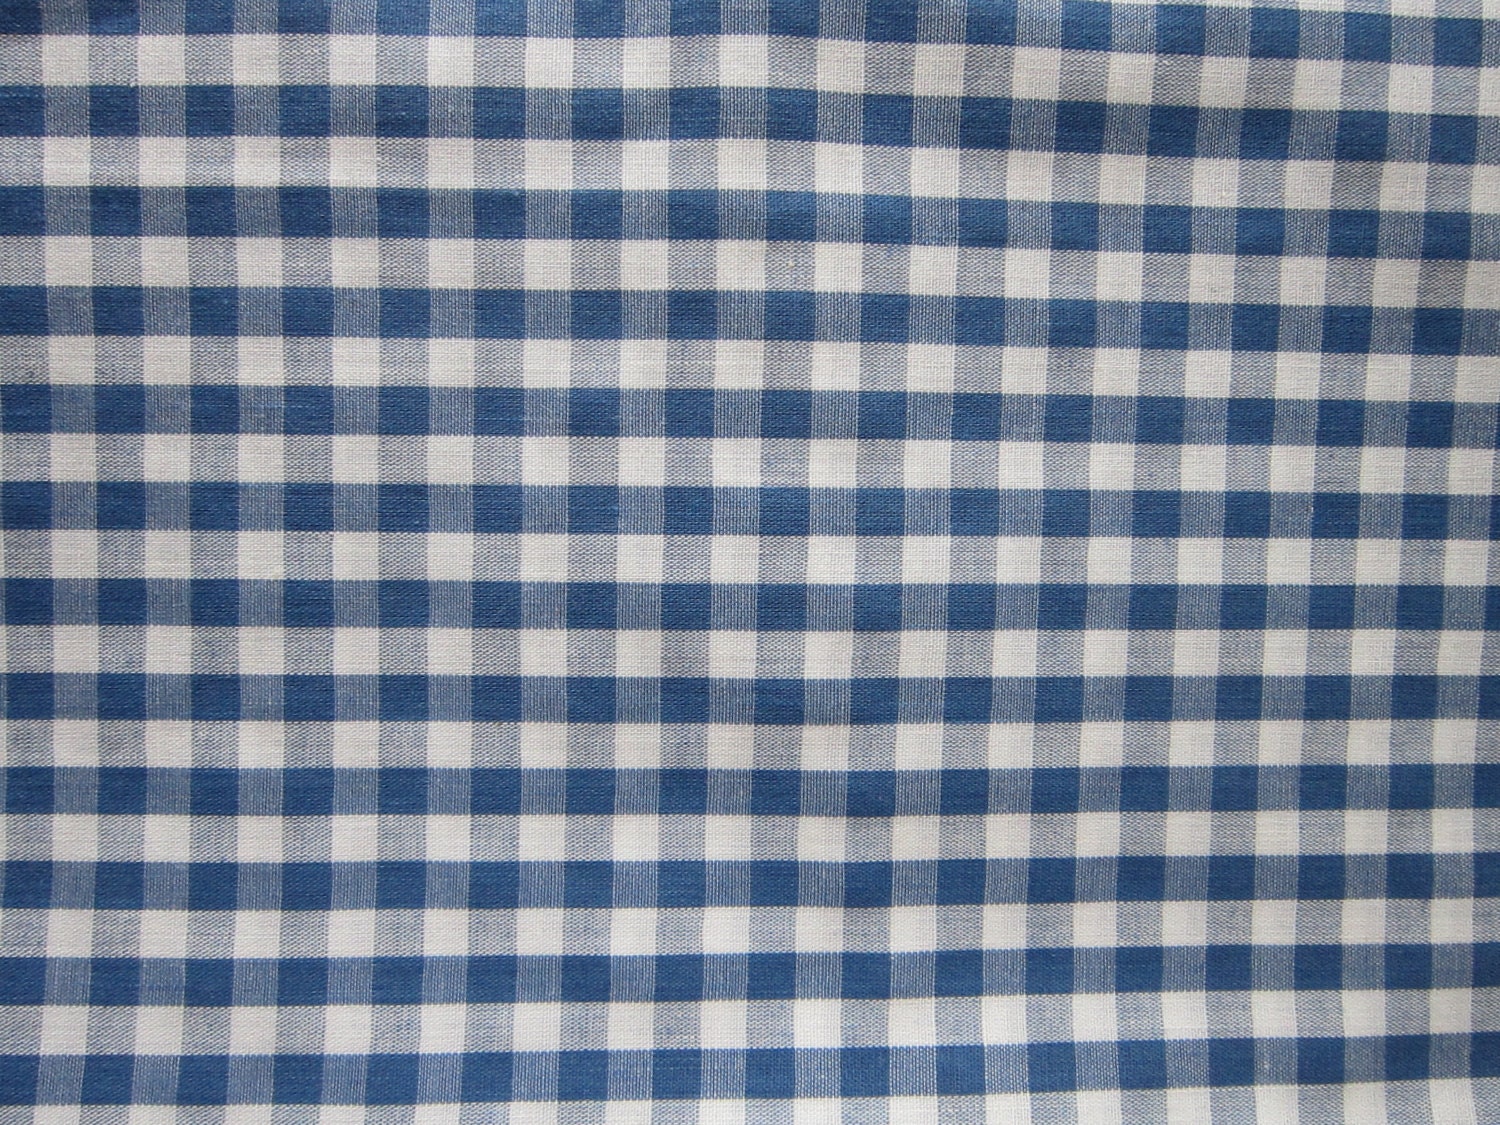 7213 1 yard antique 1930's woven blue & white gingham cotton especially lovely